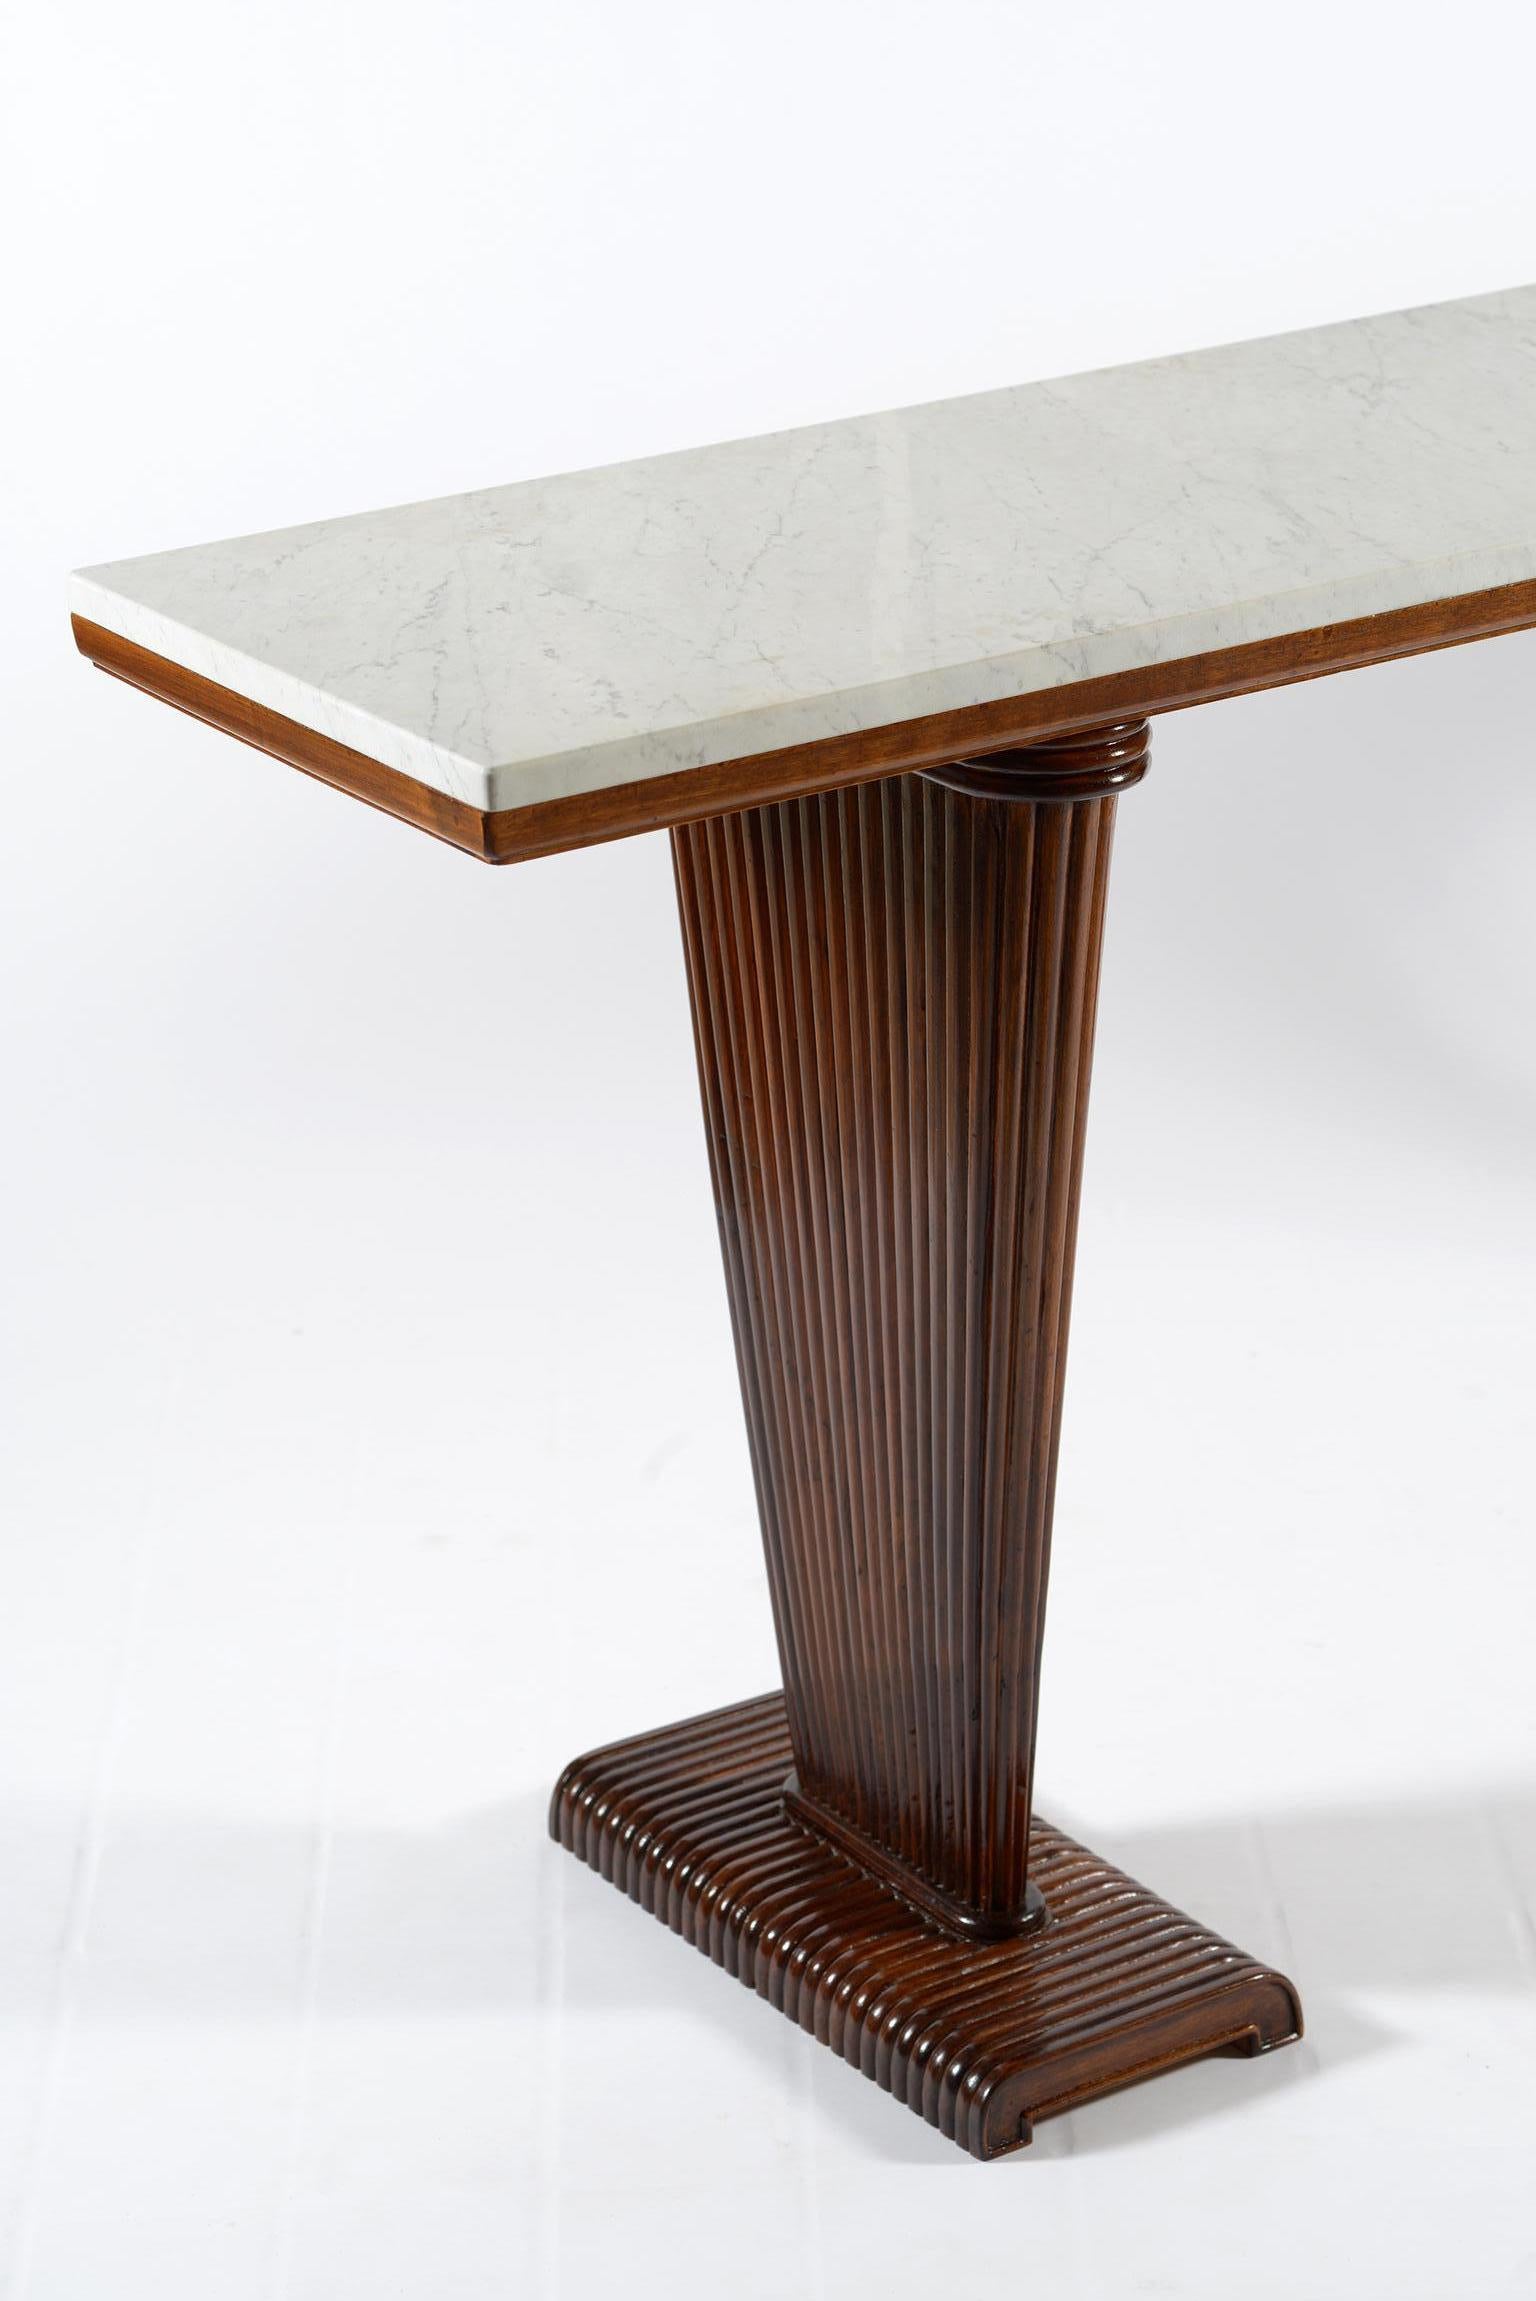 Midcentury Italian Console with White Marble Top, 1940 (Mitte des 20. Jahrhunderts)